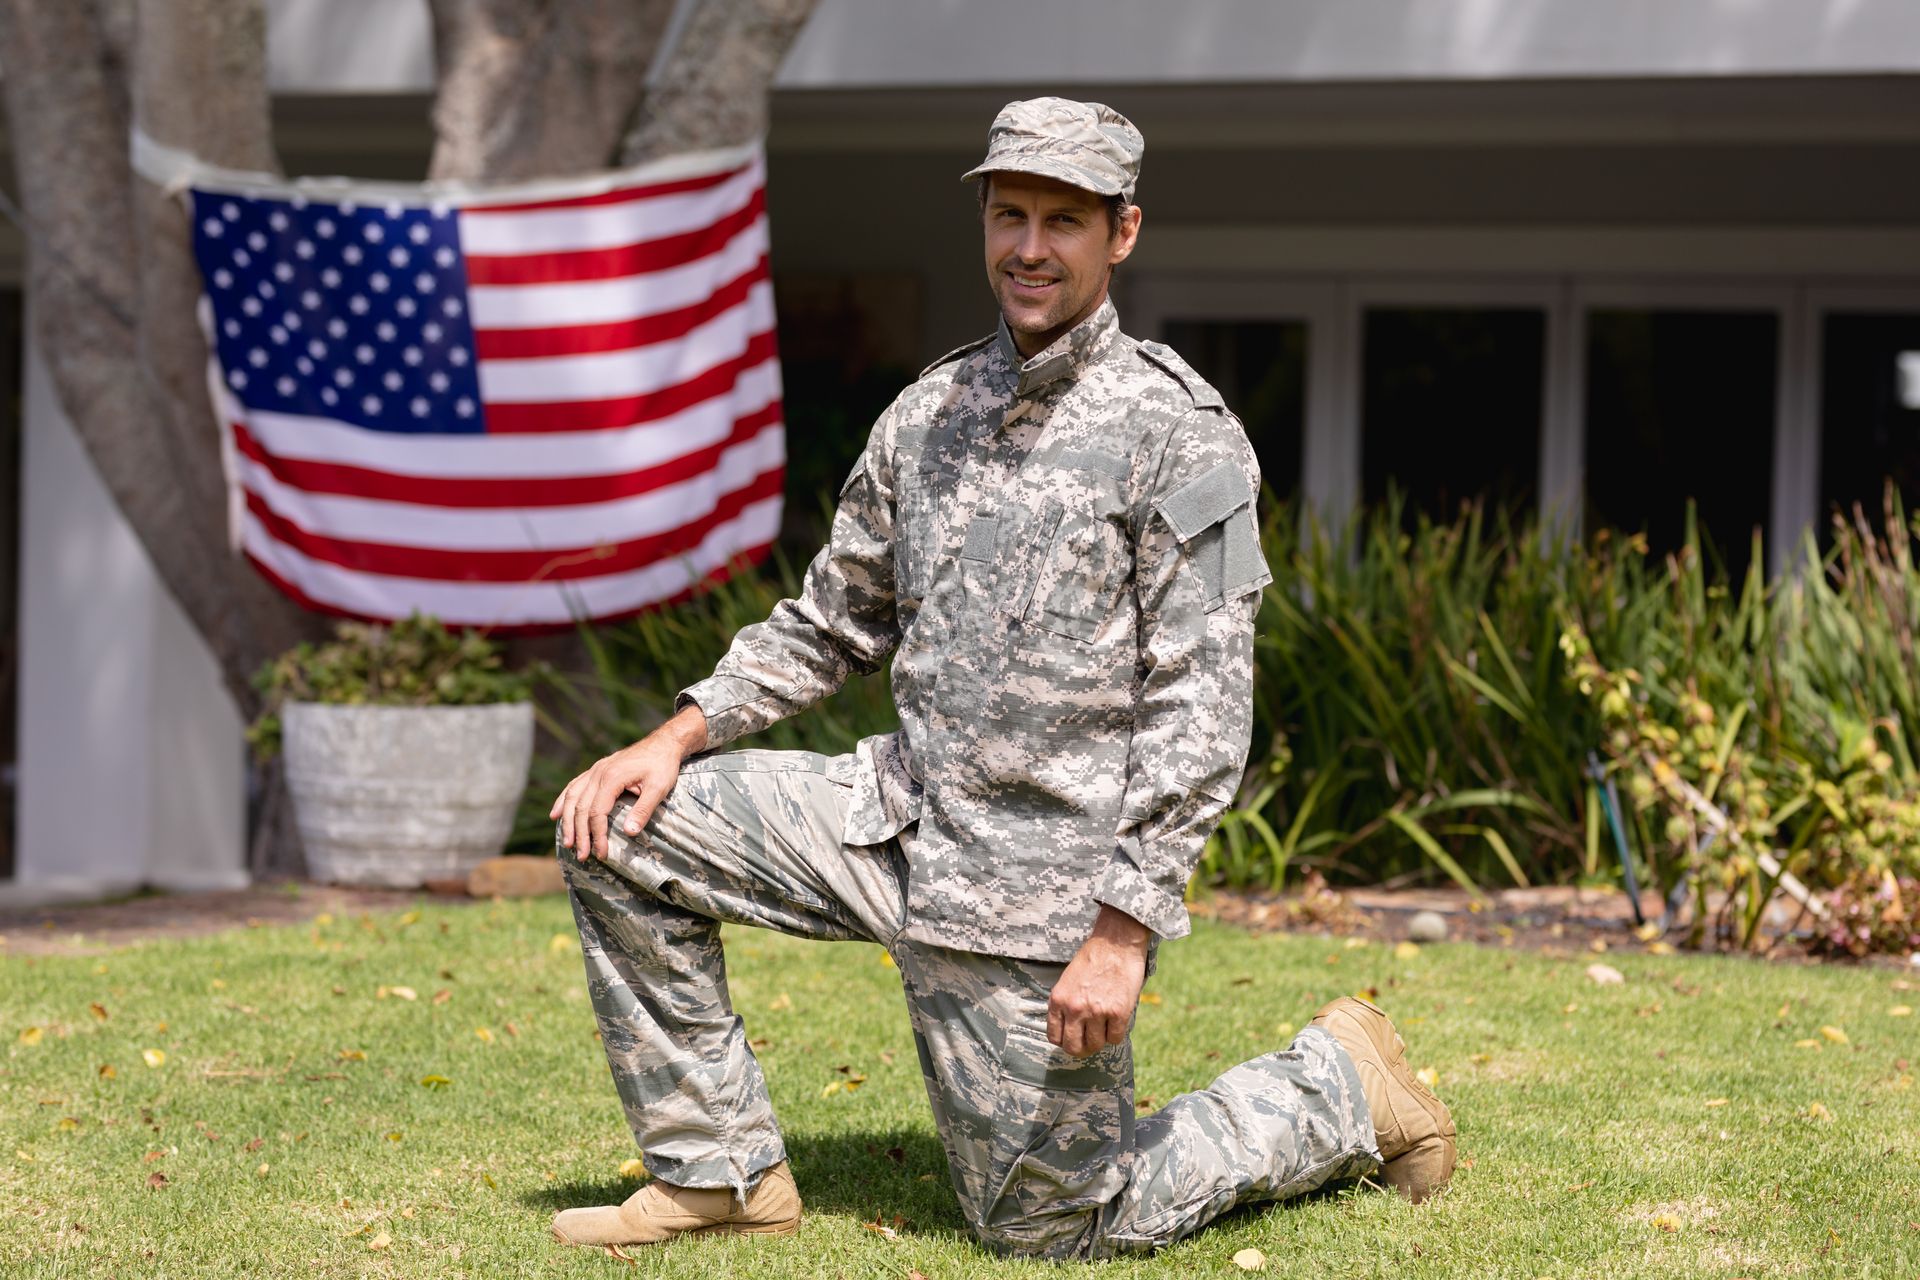 A man in a military uniform is kneeling in front of an american flag.